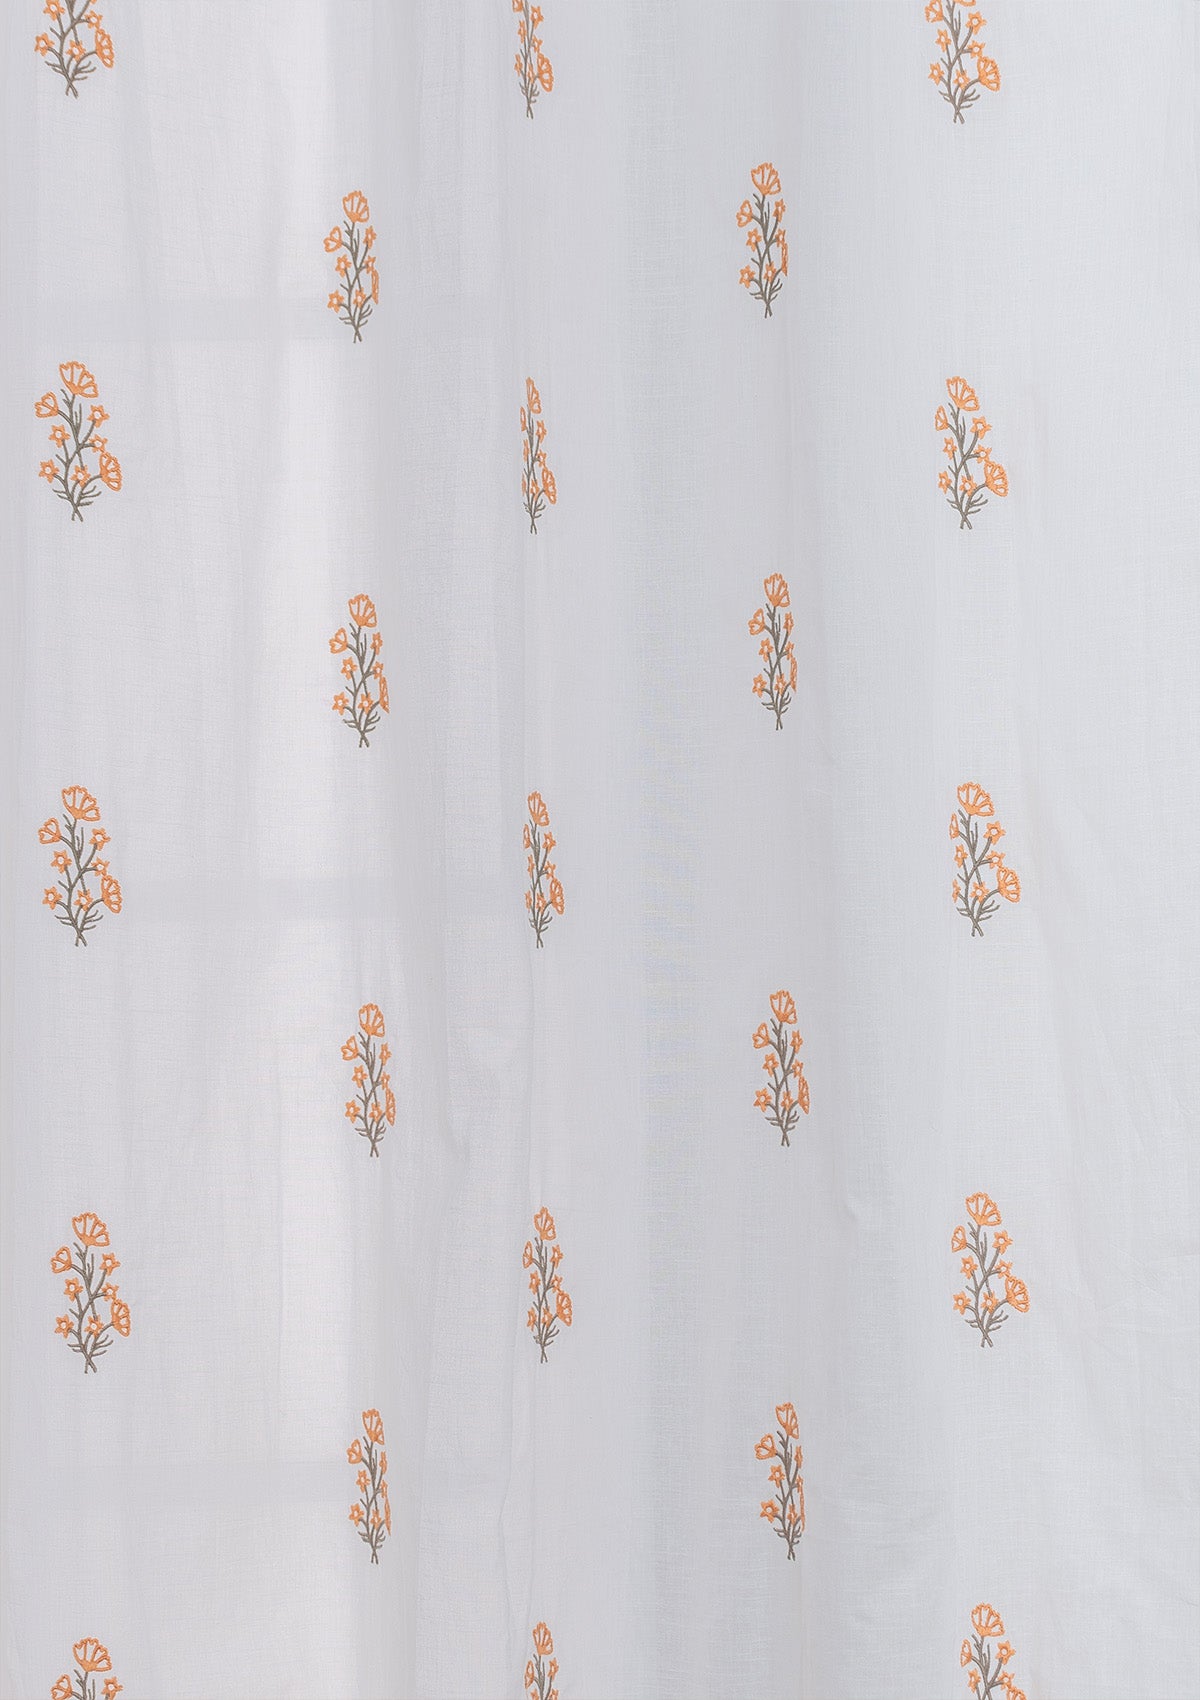 Spring premium 100% cotton floral fabric for sheer curtain